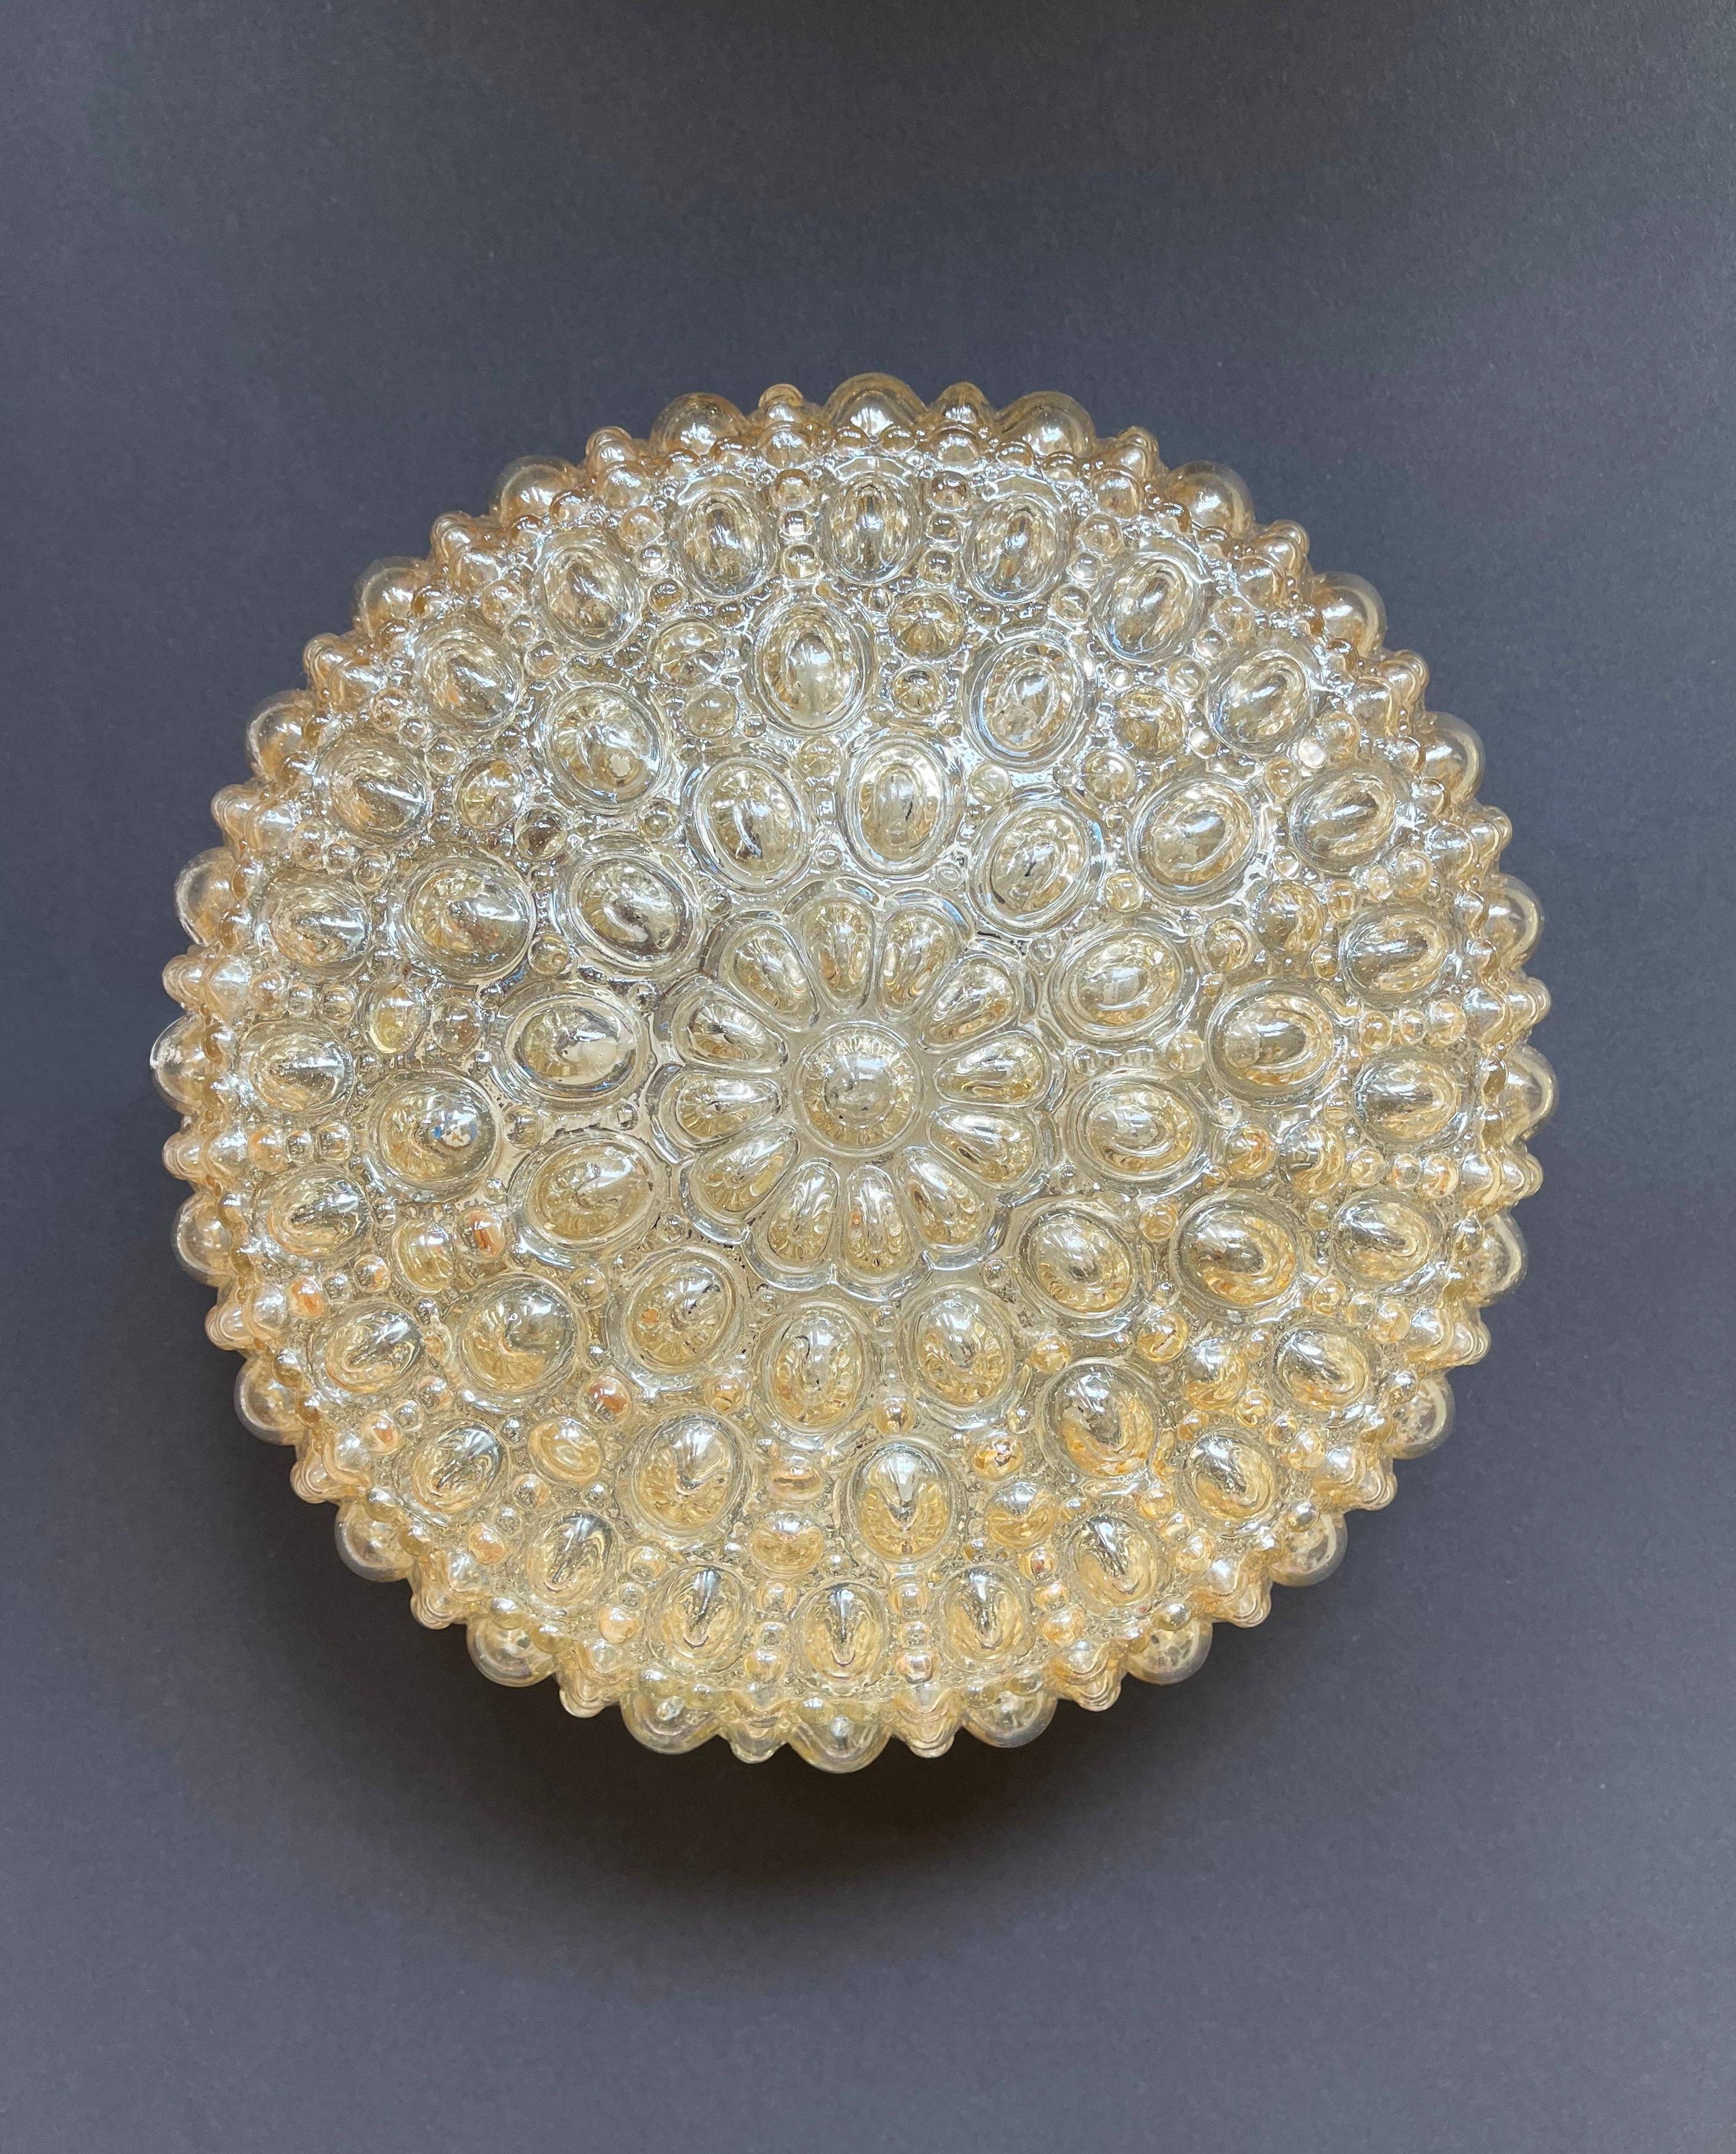 Magnificent, flush base ceiling or wall lamp by 'Glashütte Limburg', Germans famous mid century manufacturer of high-end design lighting.
Helena Tynell is one of the artists who created the most beautiful lighting of that time: here in a sea urchin